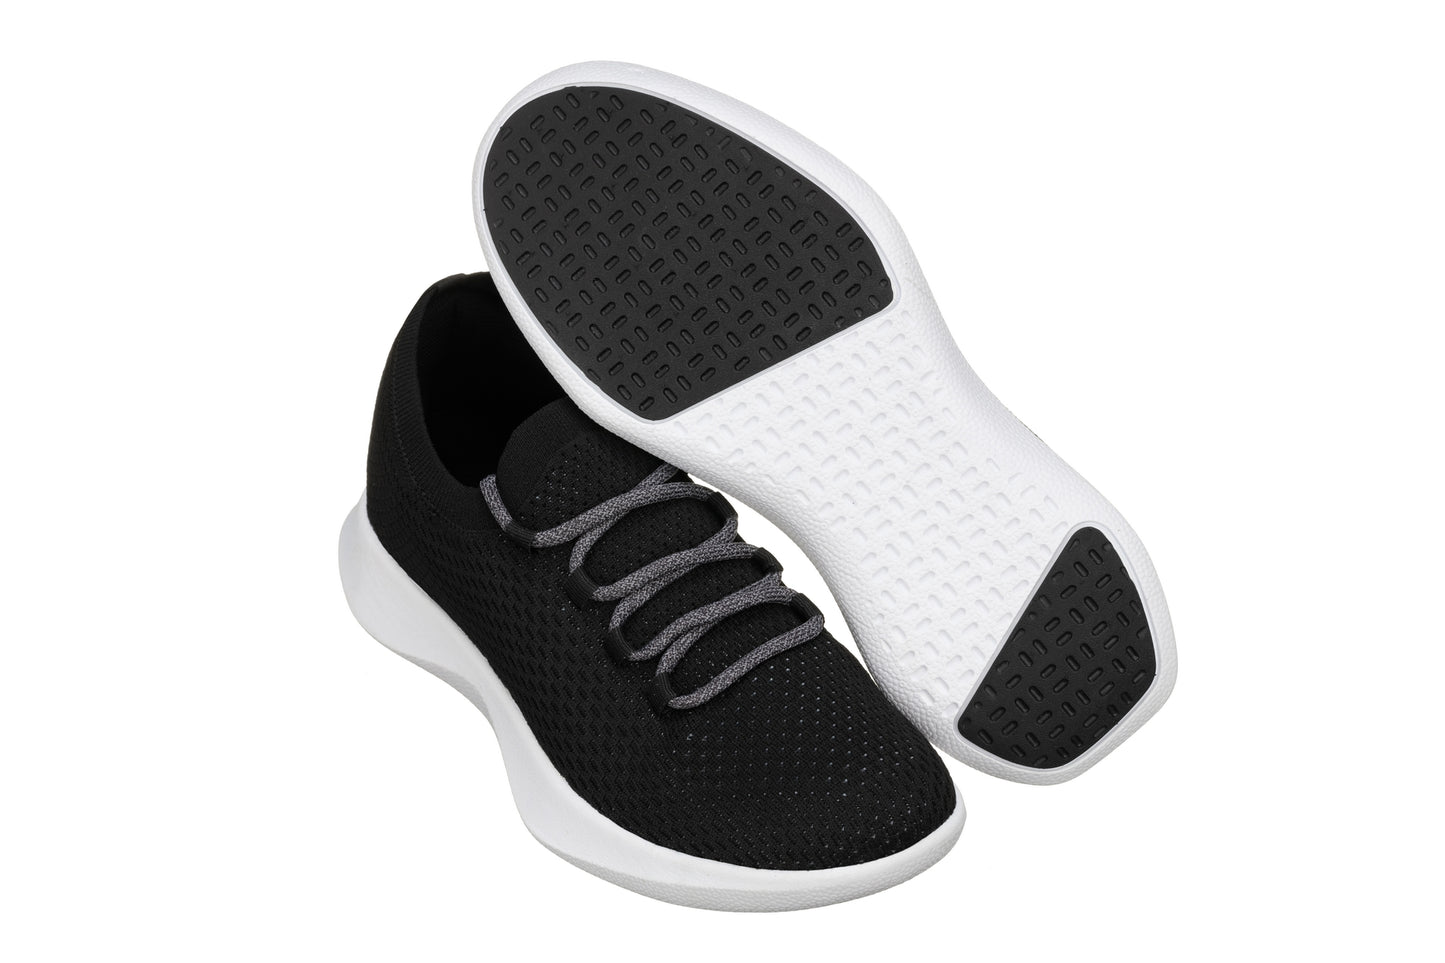 Elevator shoes height increase CALTO - Q082 - 2.4 Inches Taller (Black/Grey) - Ultra Lightweight Sneakers